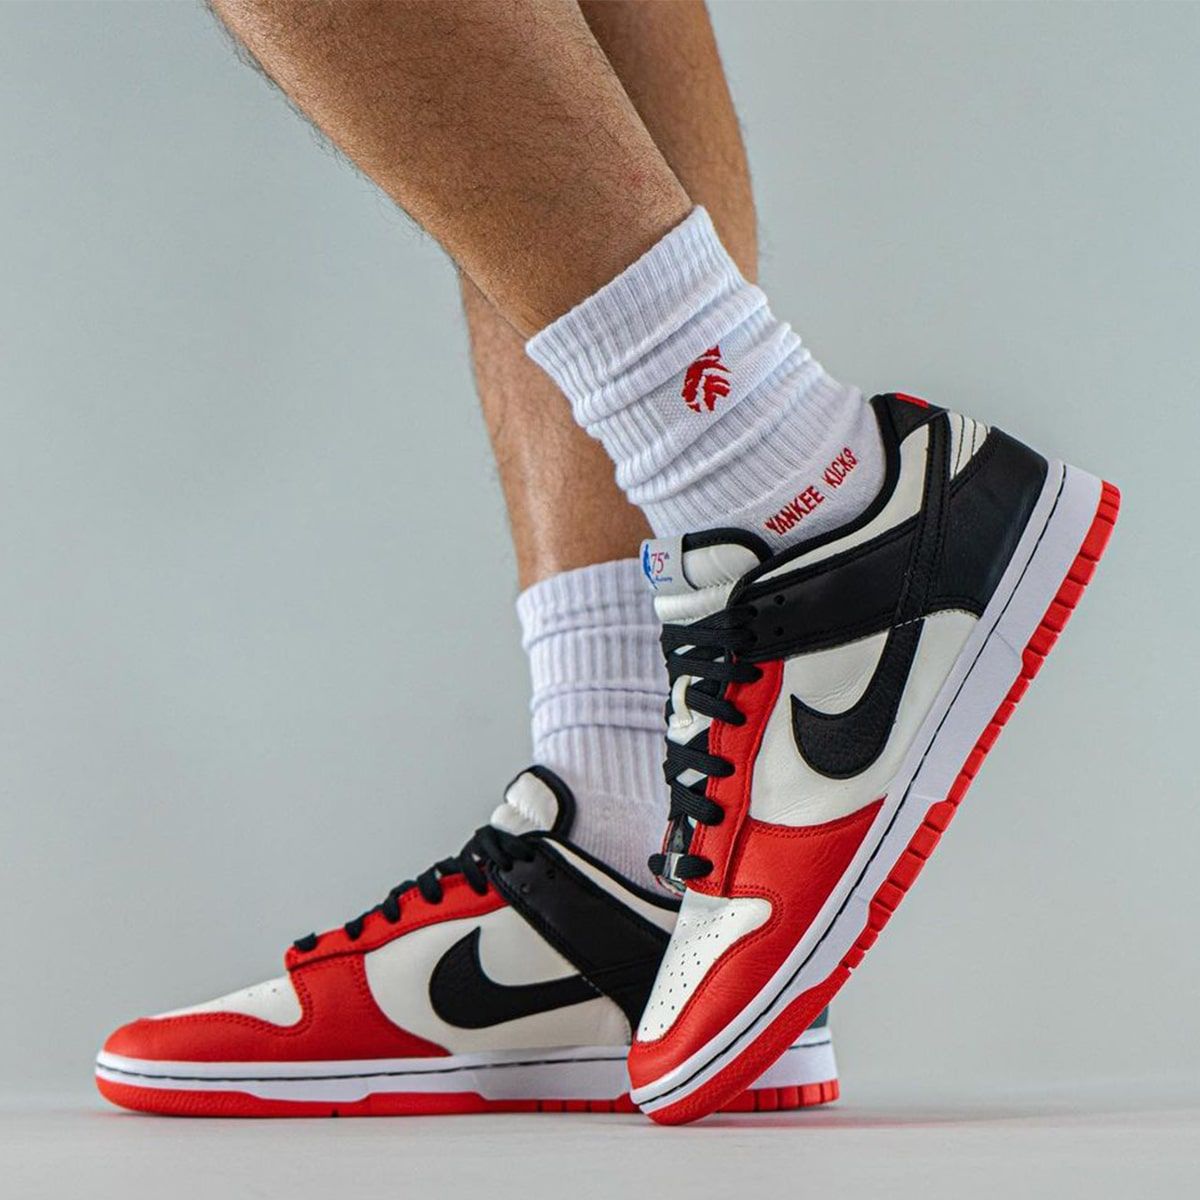 On-Foot Looks at the NBA 75th Anniversary x Nike Dunk Low 